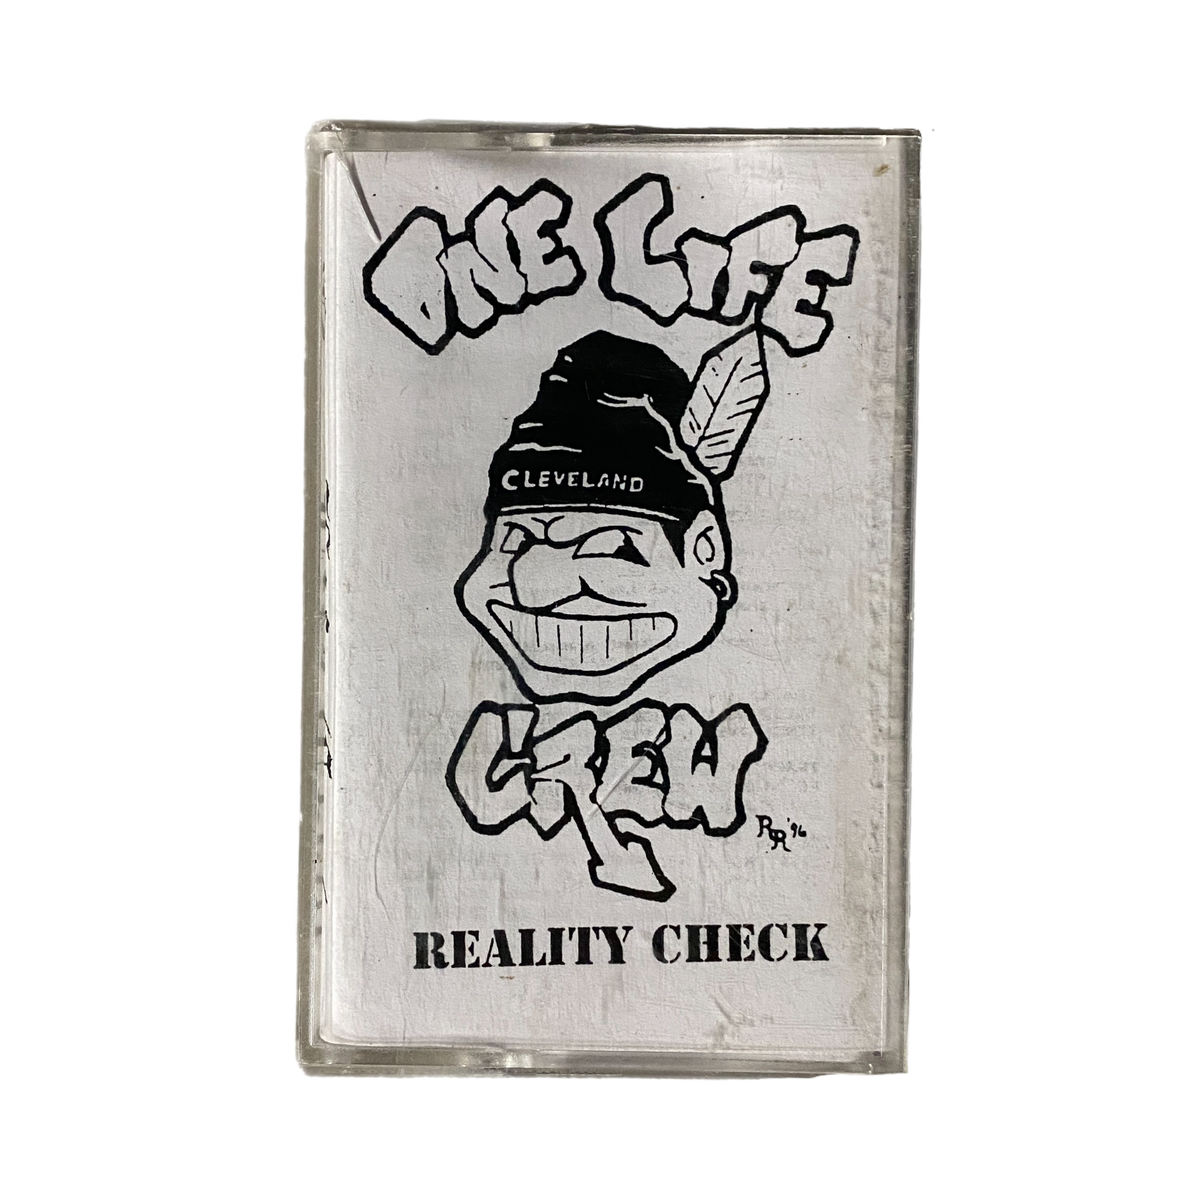 Vintage One Life Crew &quot;Reality Check&quot; Self-Released Cassette